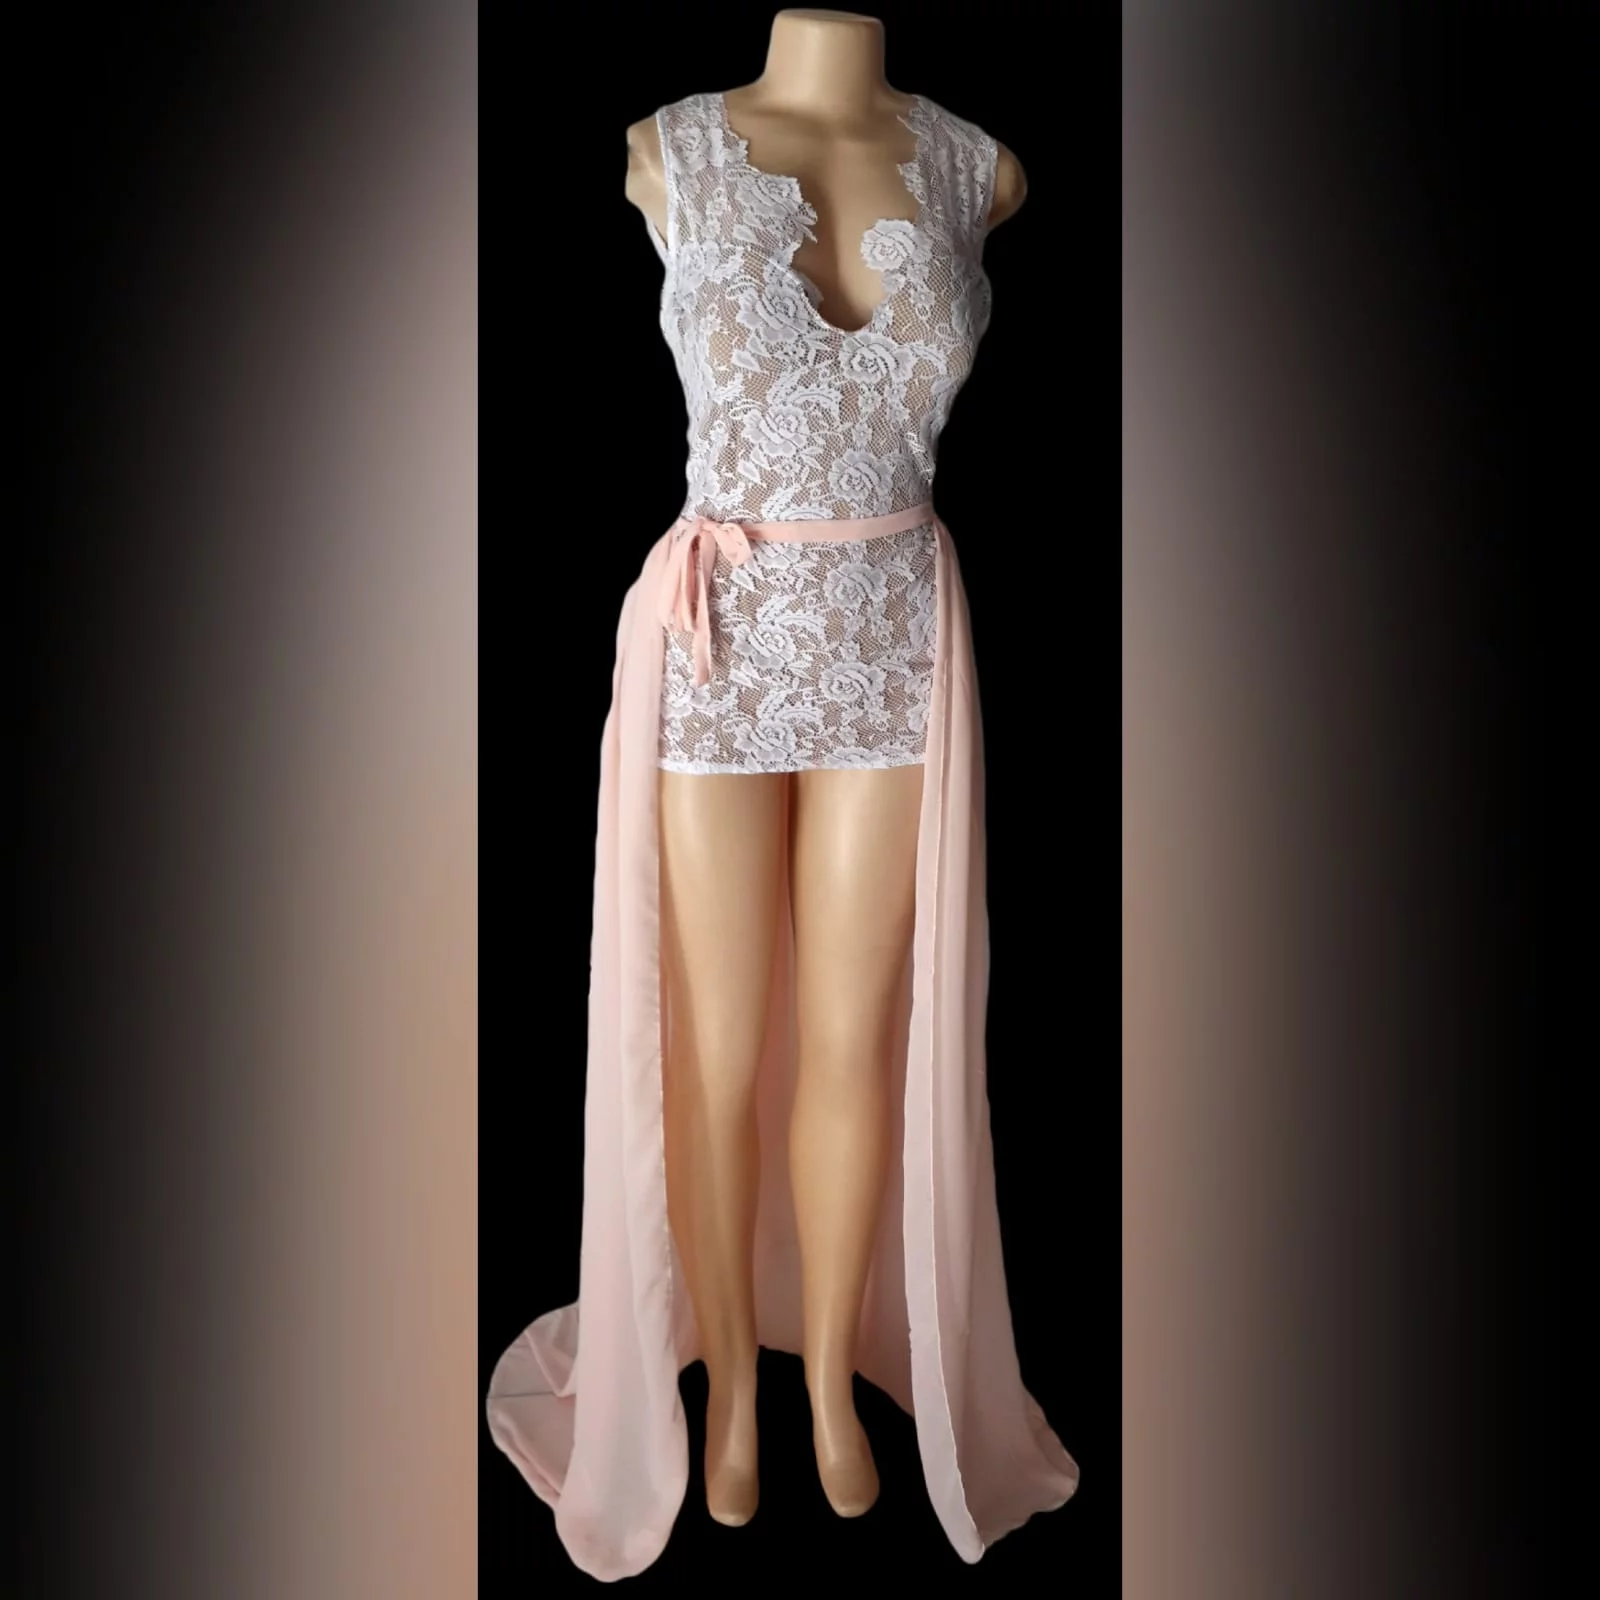 Peach and white 2 piece evening dress 1 peach and white 2 piece evening dress. Mini lace dress with a low open back, with a detachable back peach train